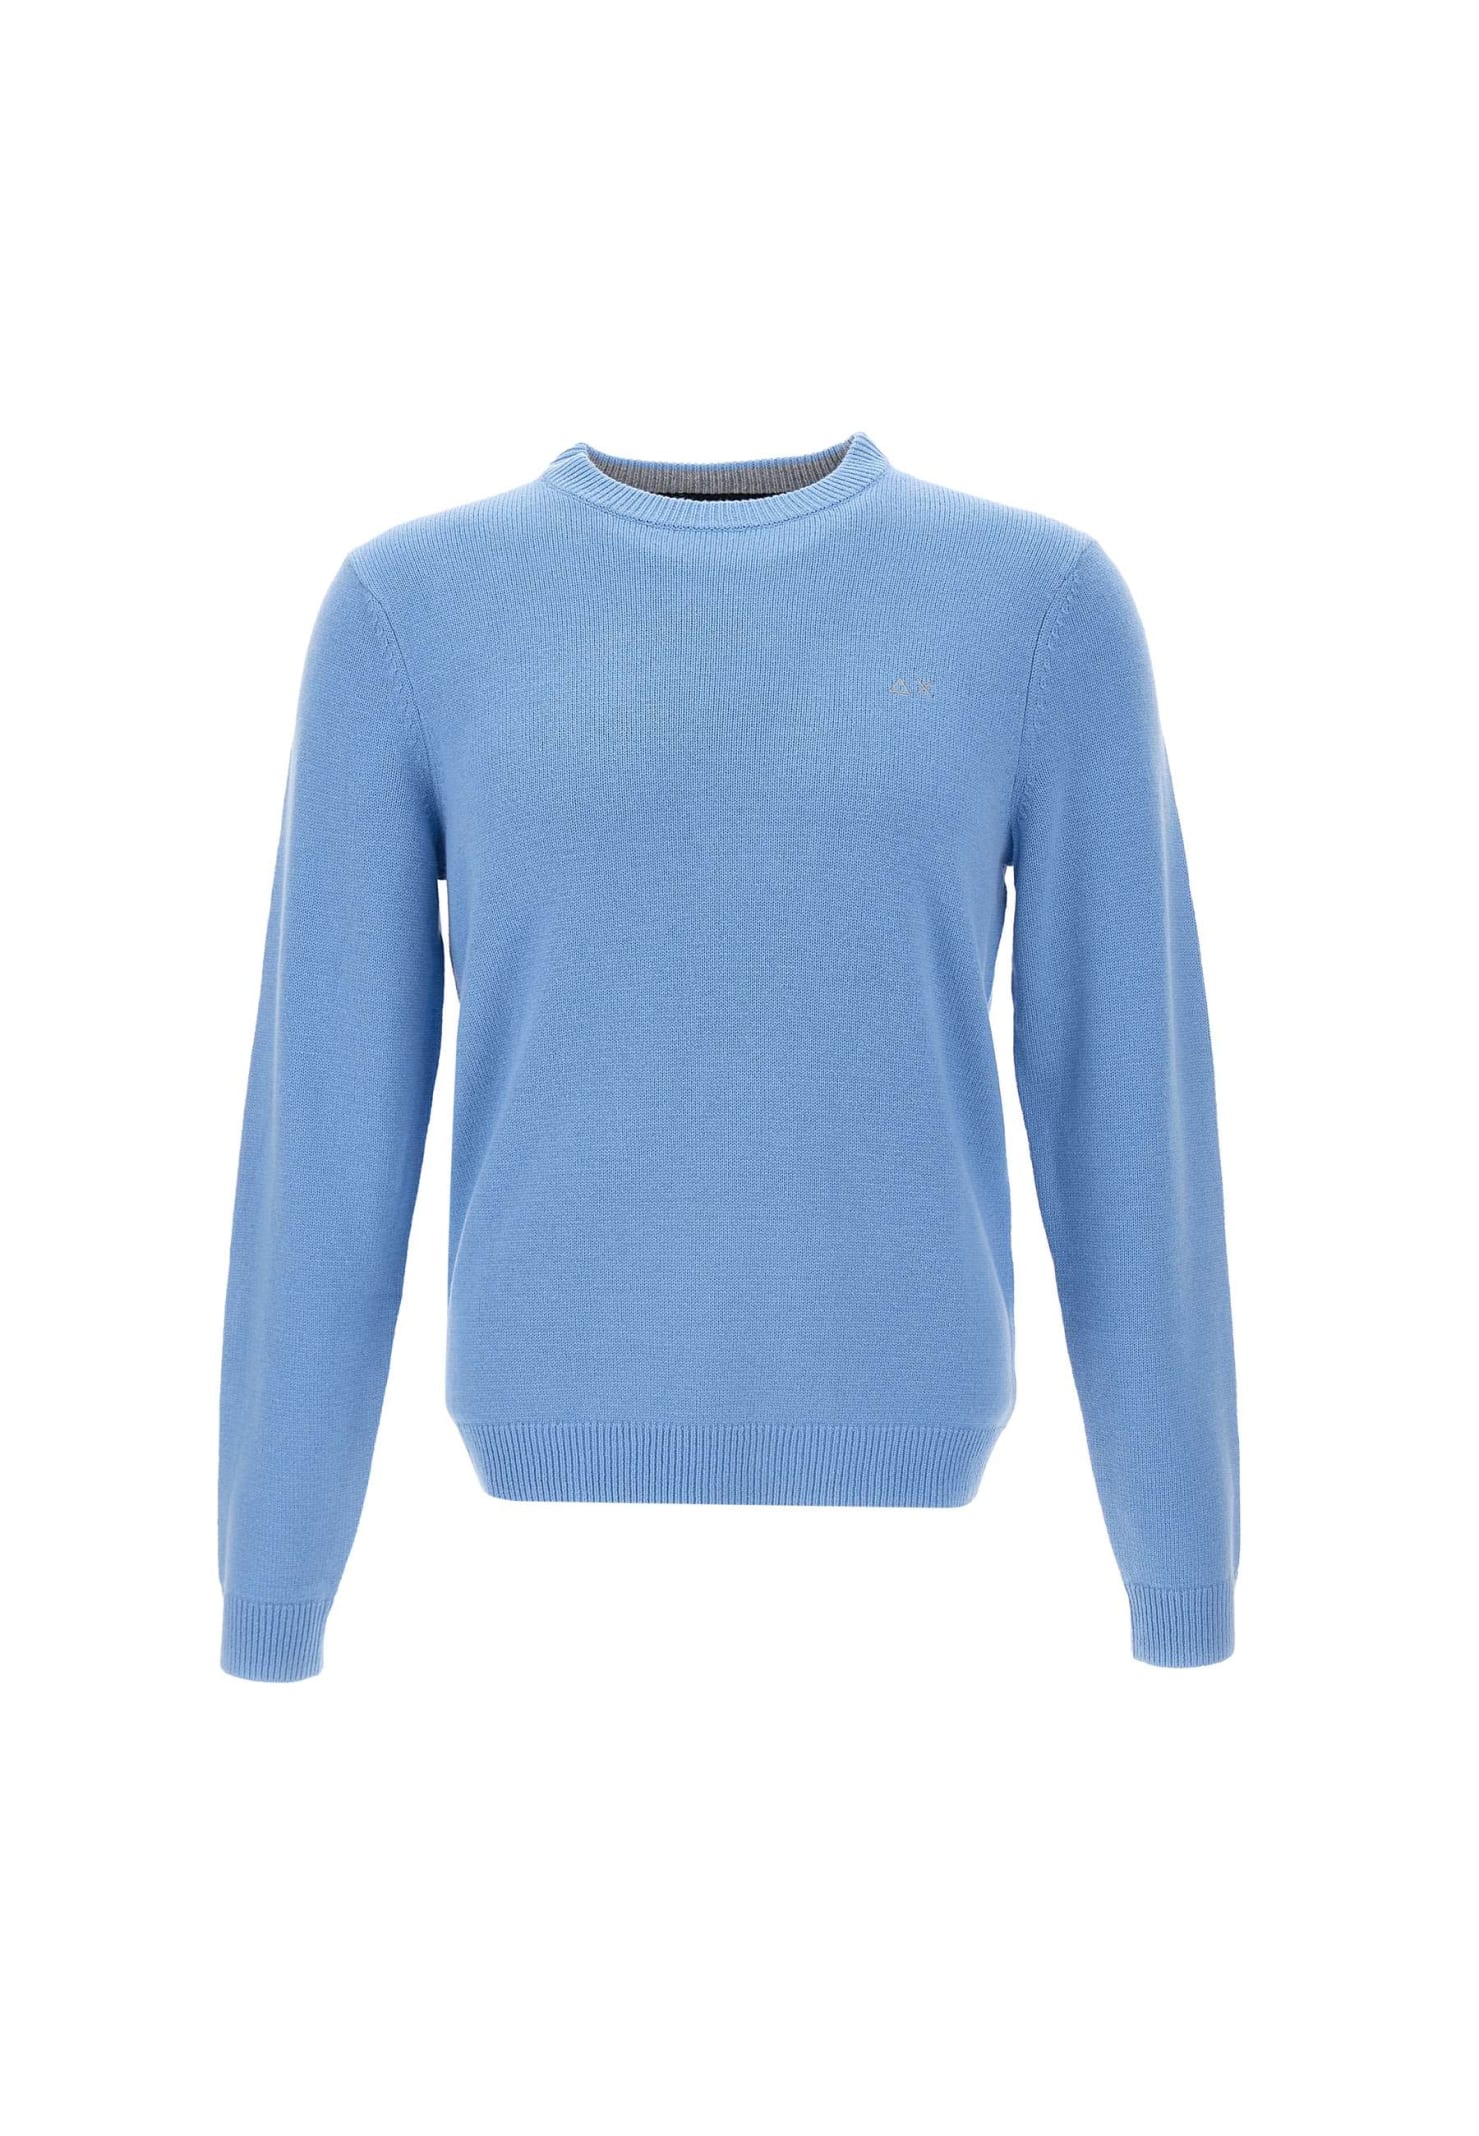 Sun 68 Round Solid Wool And Viscose Blend Pullover In Blue